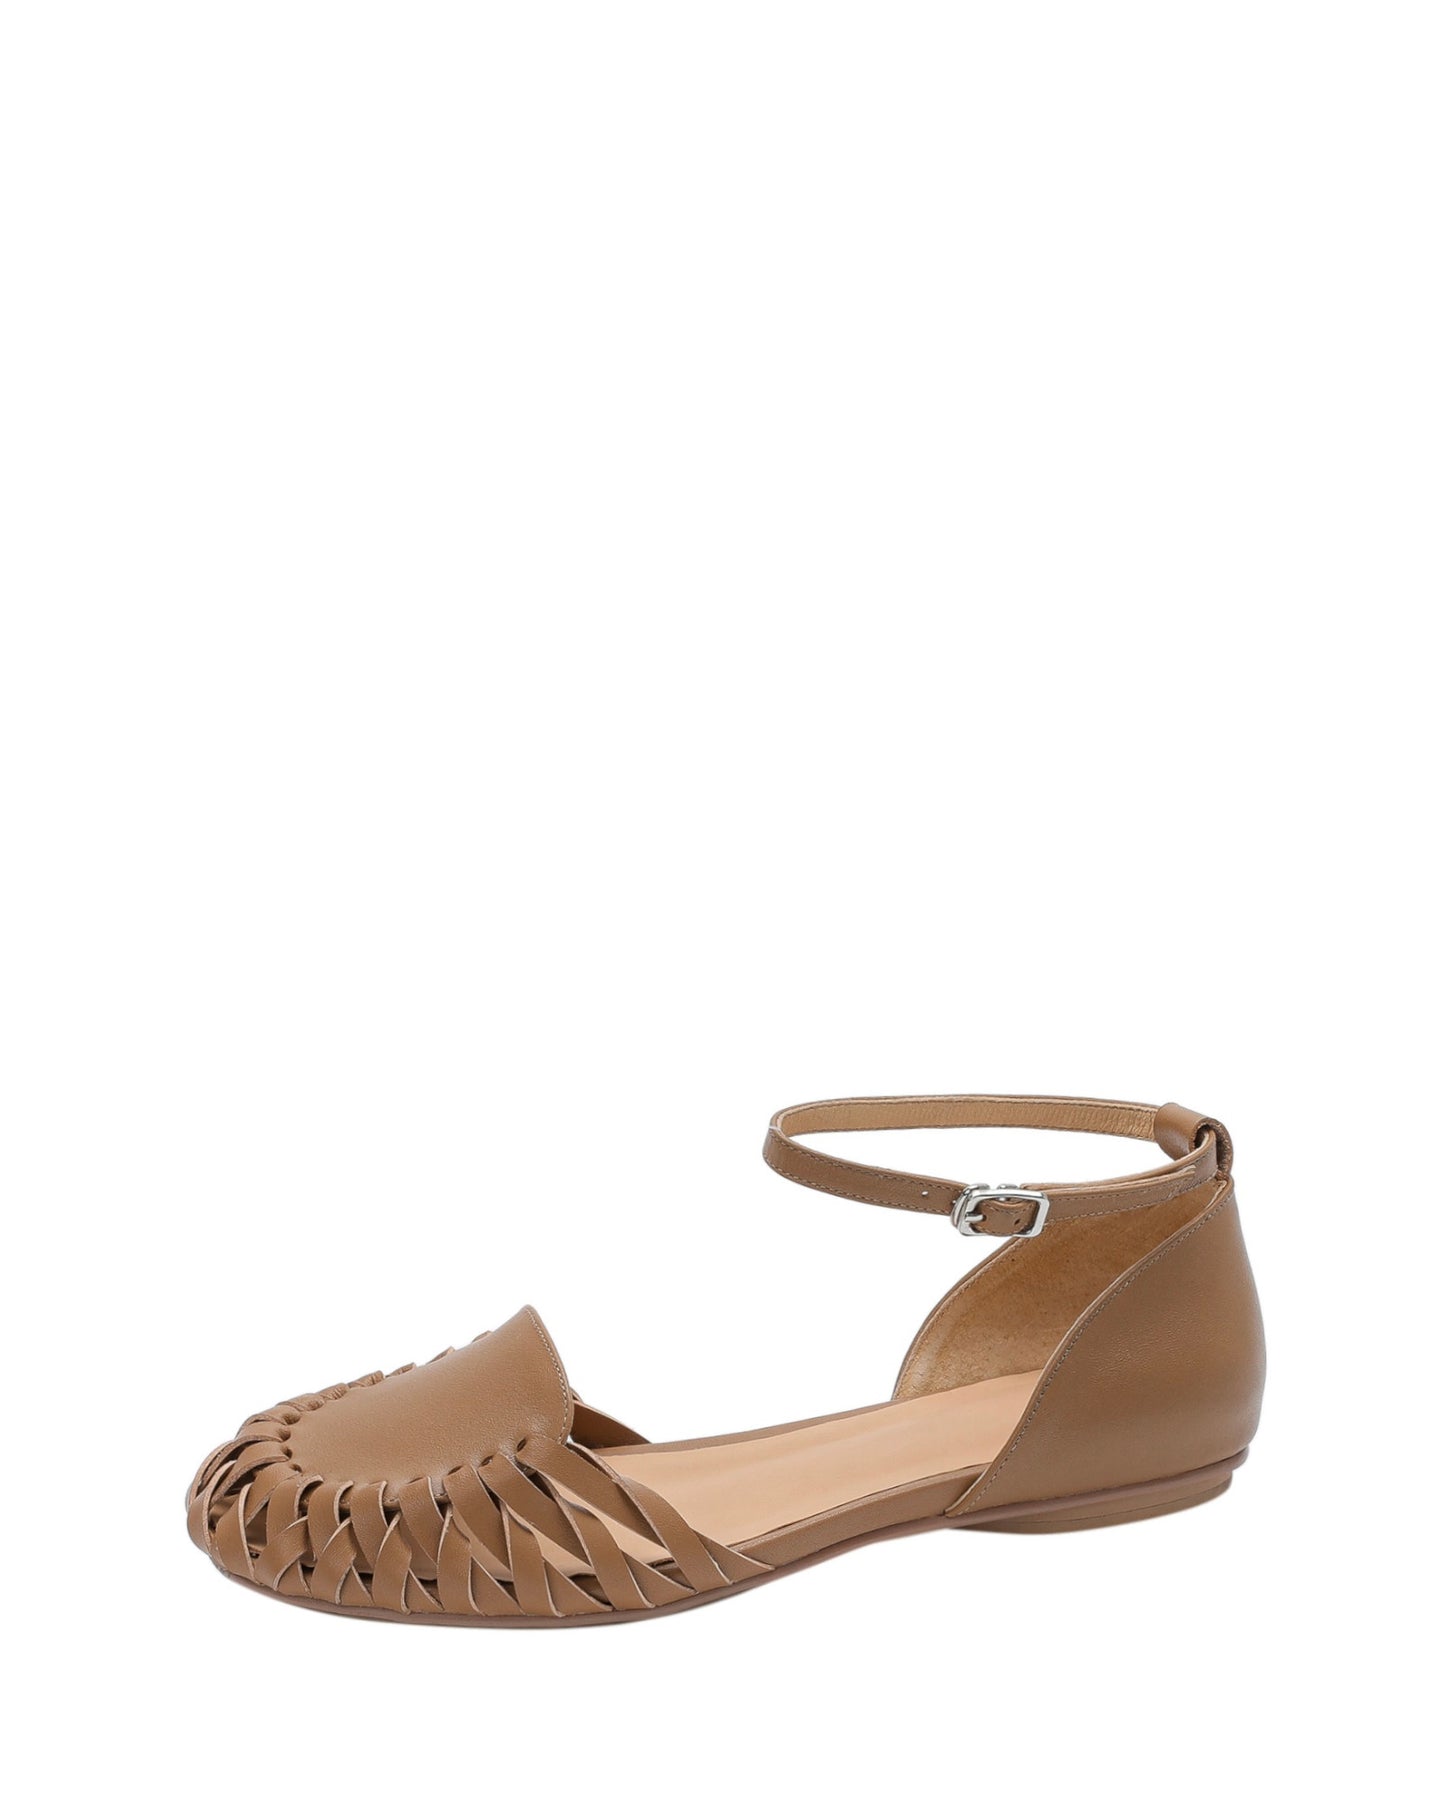 Morn-Tan-Leather-Woven-Flat-Sandals